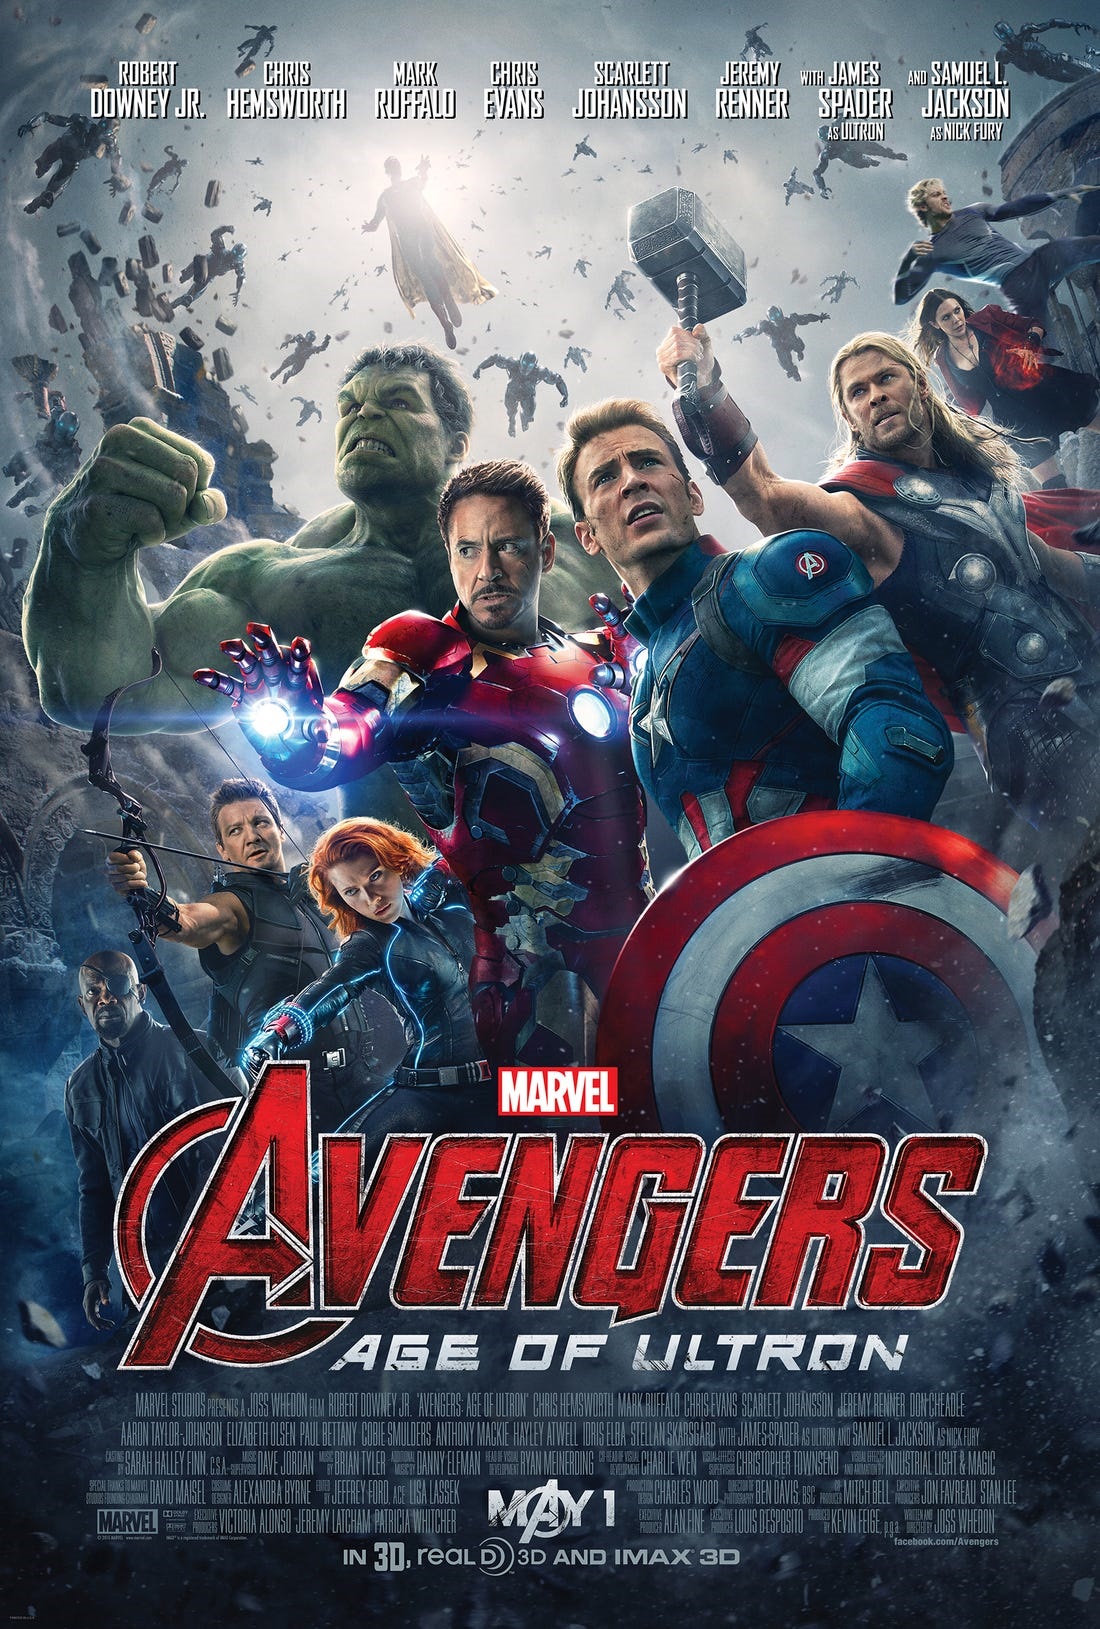 Photo_of_Avengers:Age_of_Ultron_Poster_2015